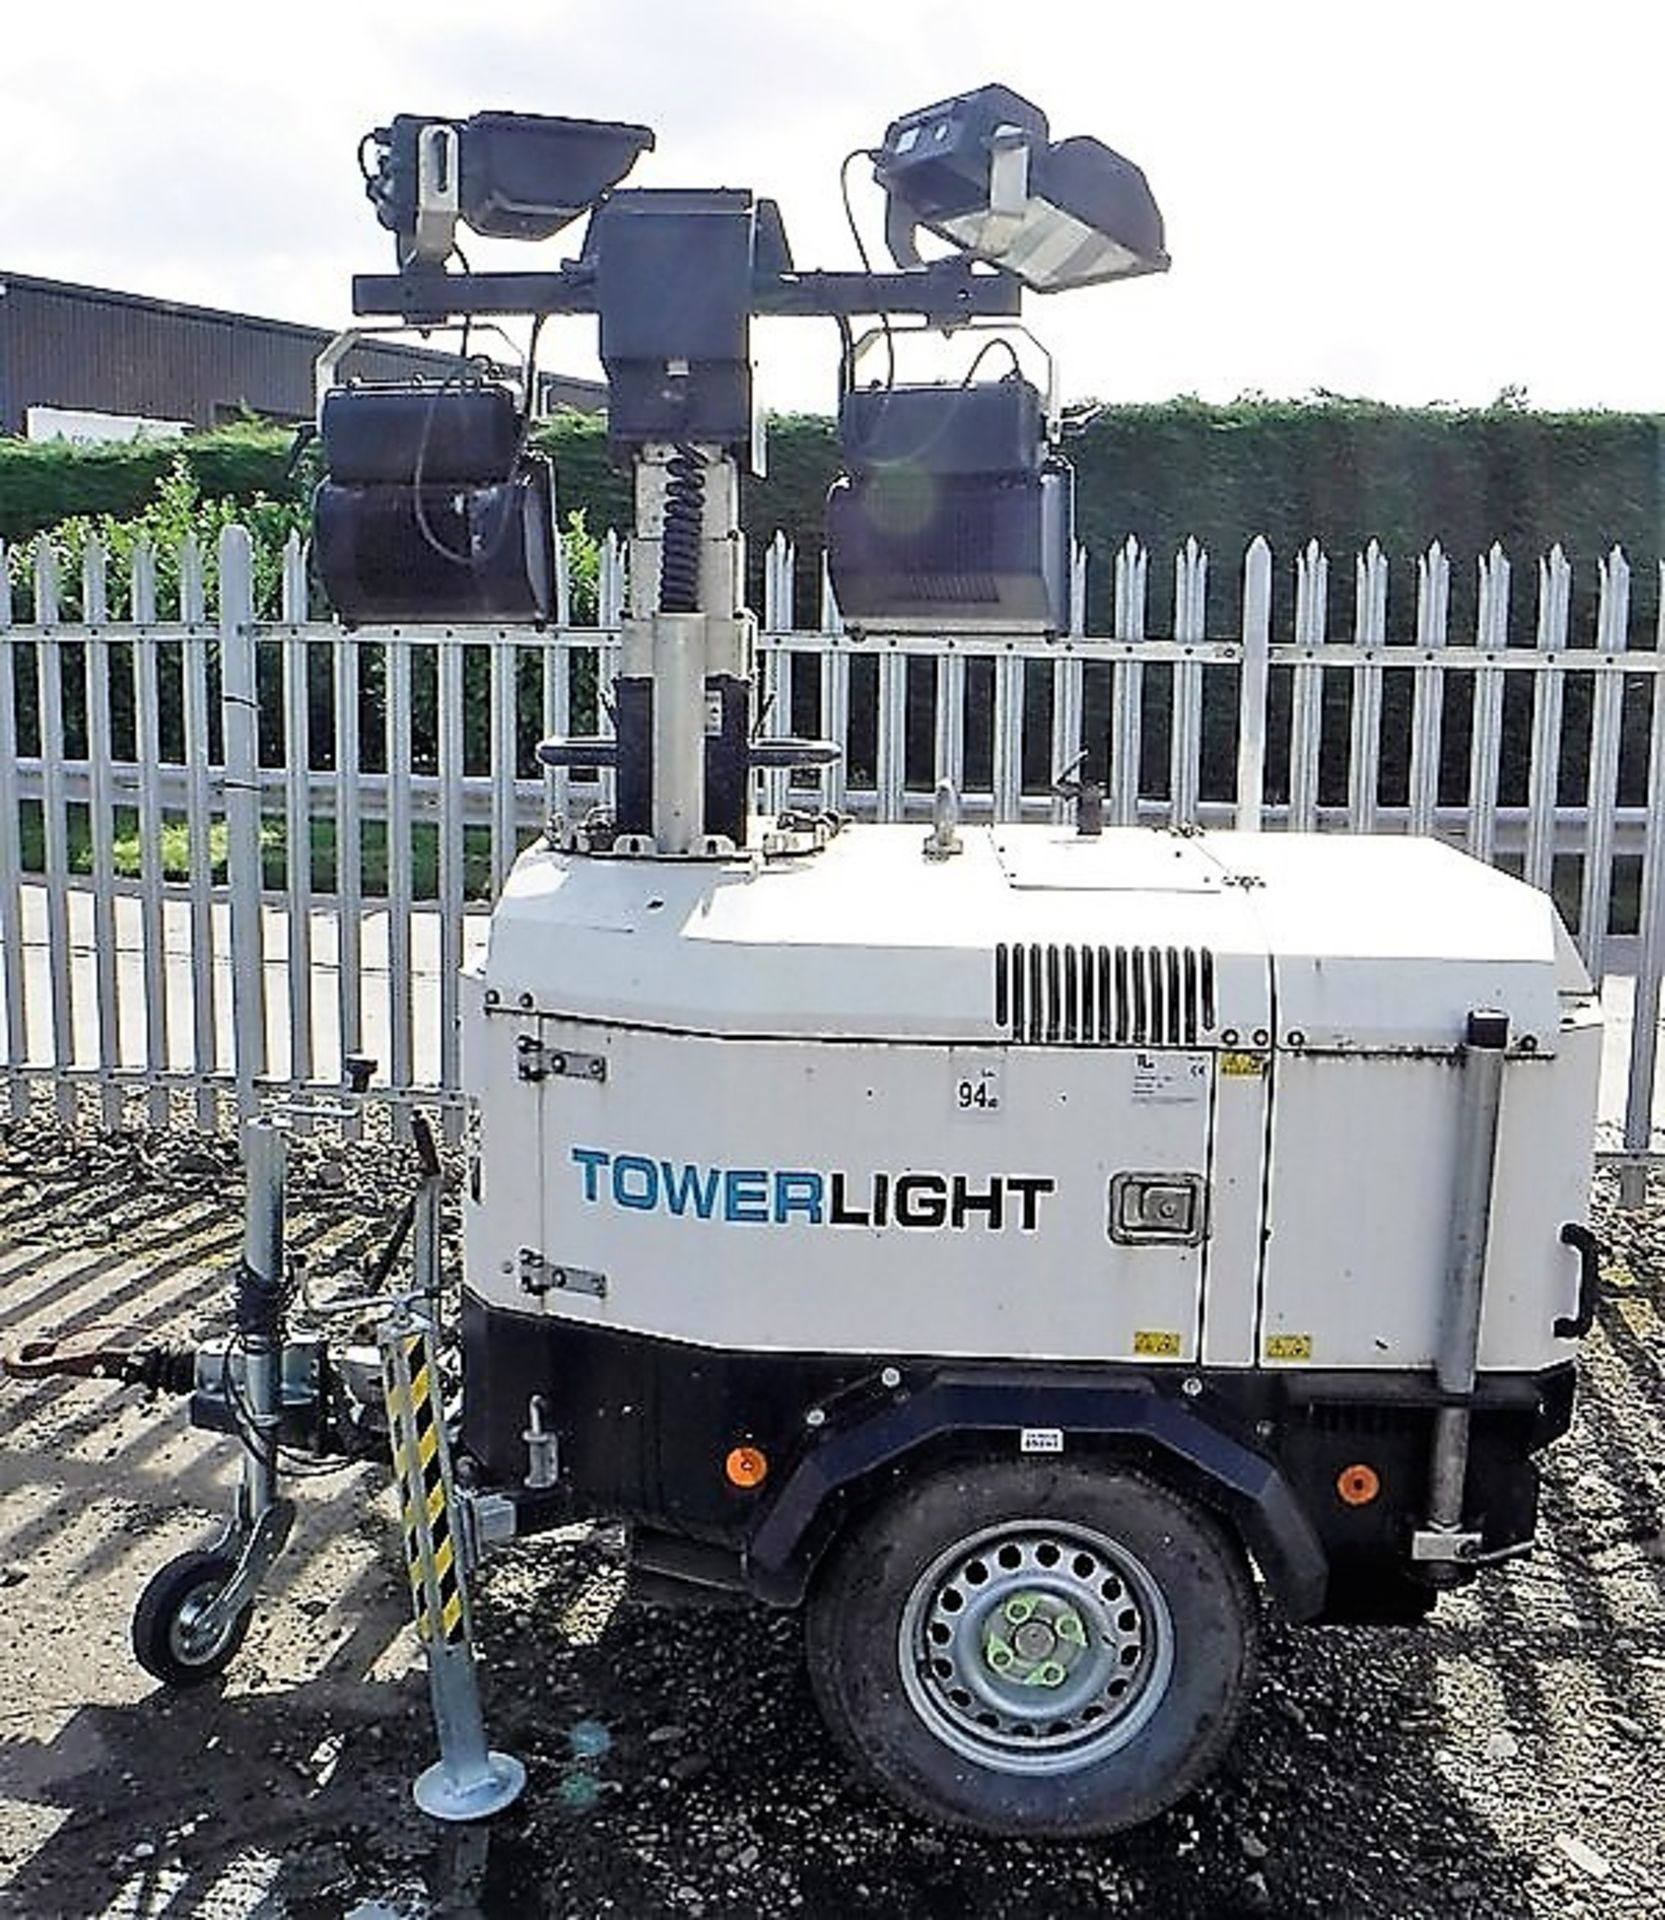 TOWER LIGHT VB9 mobile tower light, galvansed sectons hydraulic lifting system 2.5kva - 230 v outle - Image 2 of 7